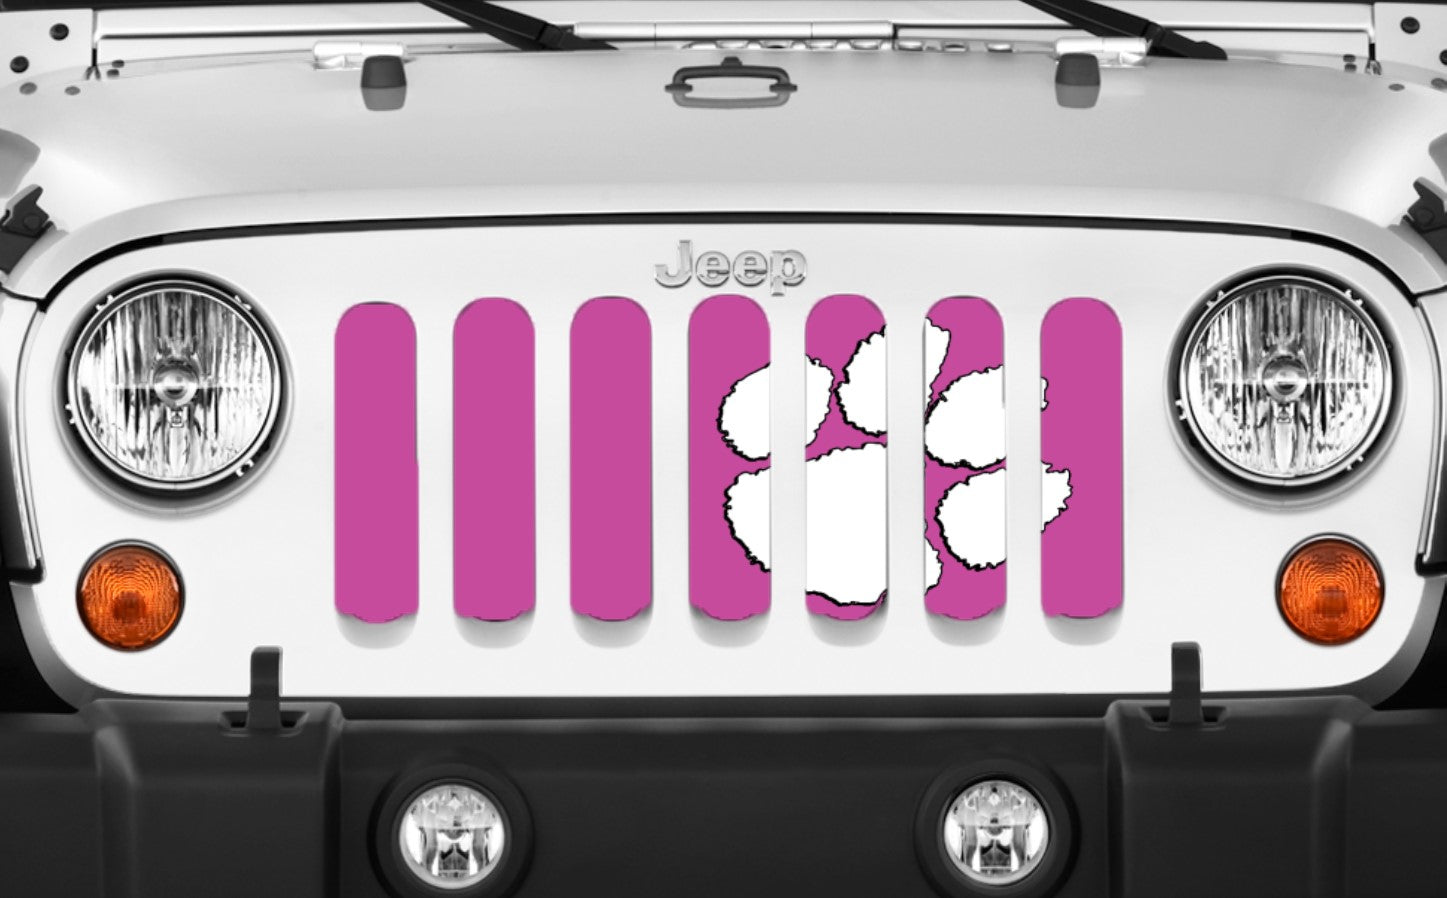 Jeep Wrangler White Tiger Paw on Hot Pink Grille Insert | Dirty Acres